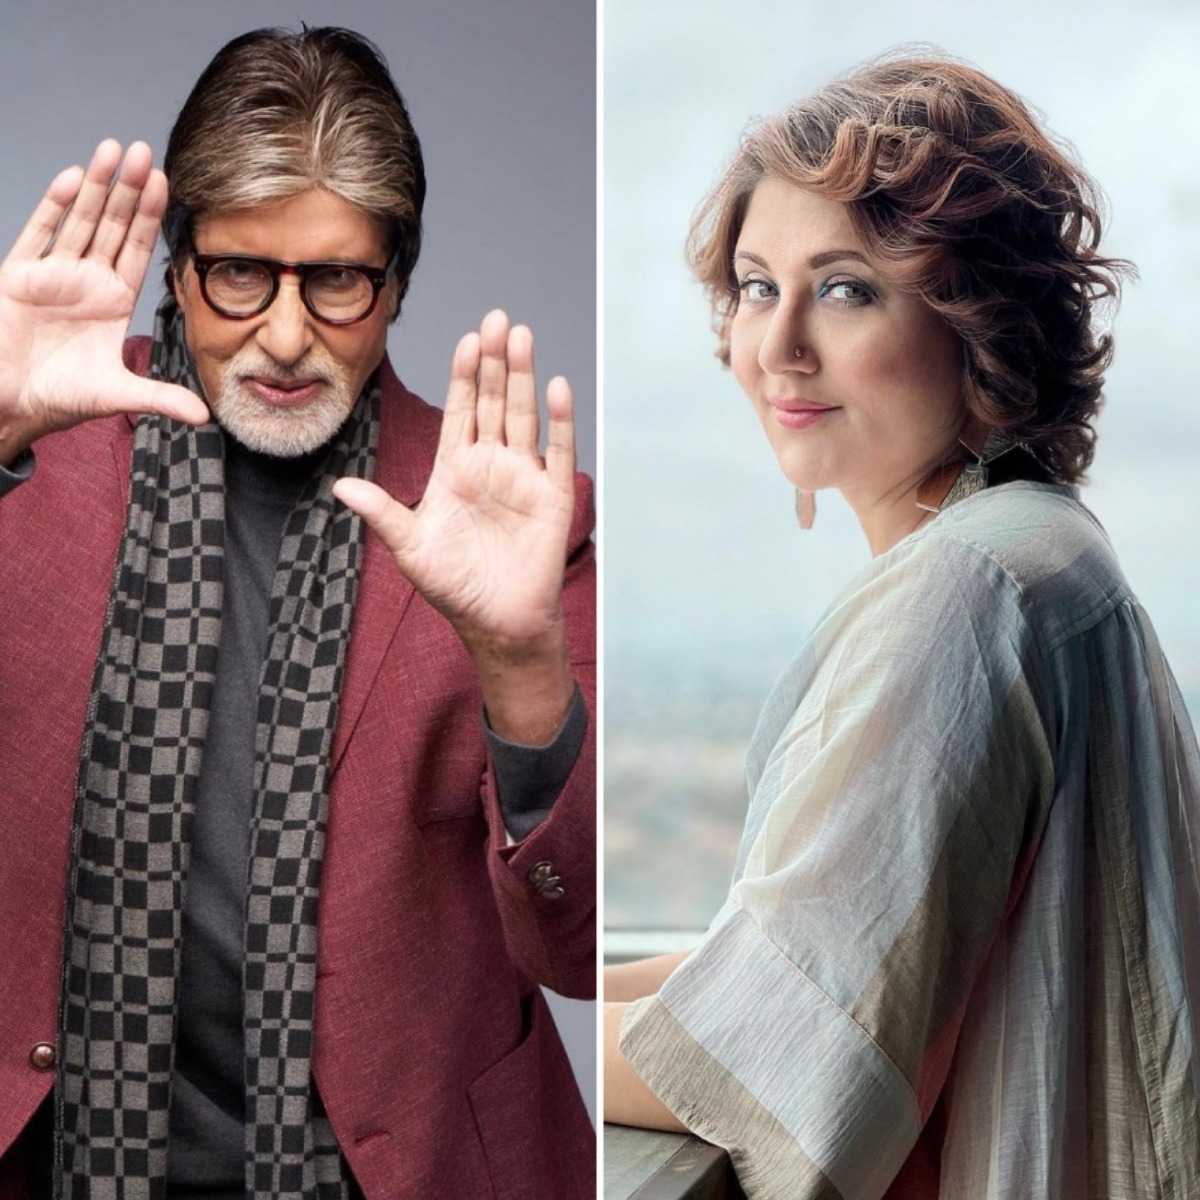 https://www.mobilemasala.com/film-gossip/Exclusive-Swastika-Mukherjee-works-with-Amitabh-Bachchan-in-a-courtroom-thriller-i156337